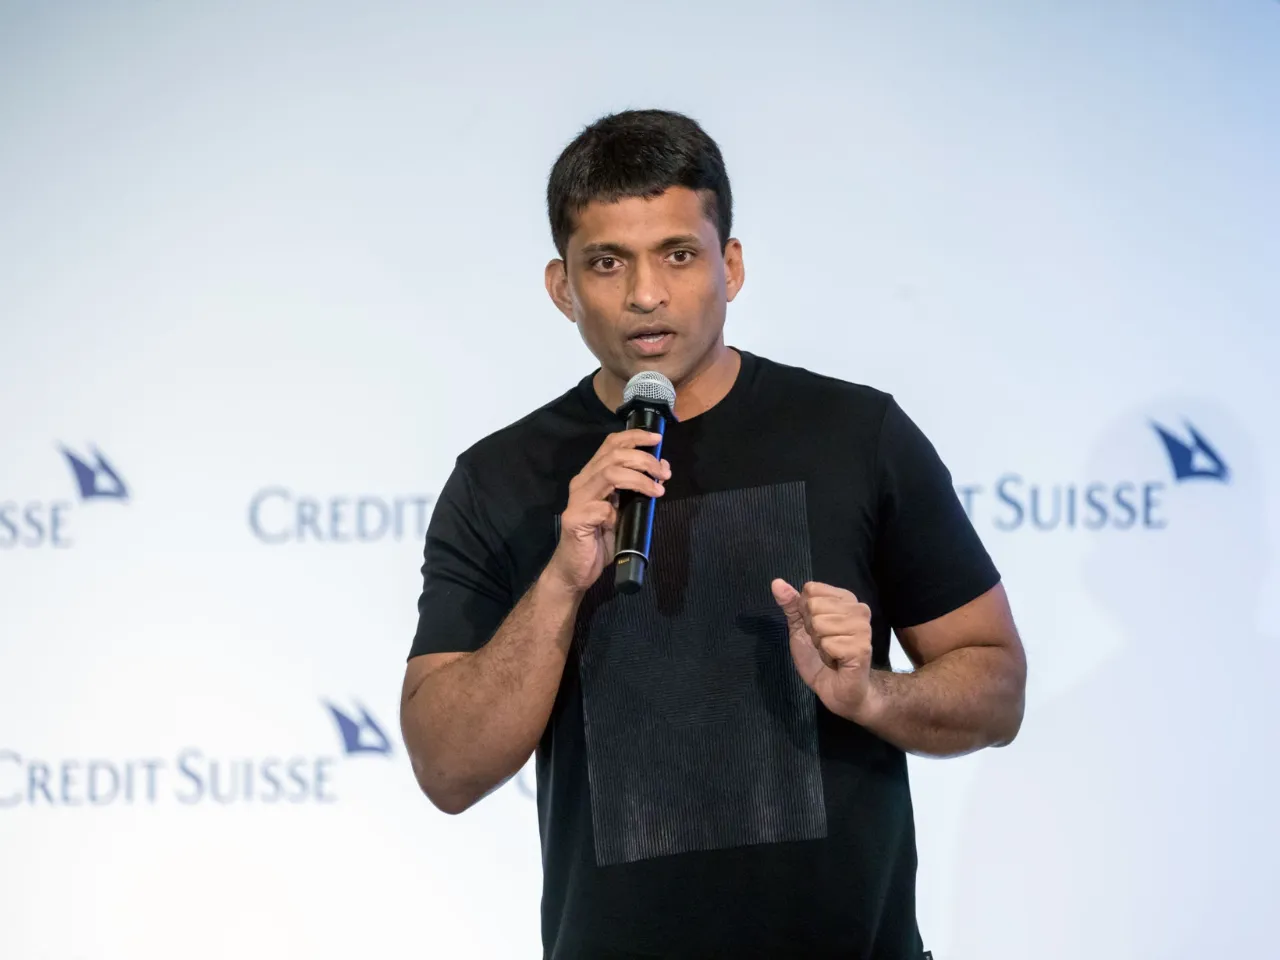 Edtech giant Byju's continues to raise funds, this time debt of $250 million